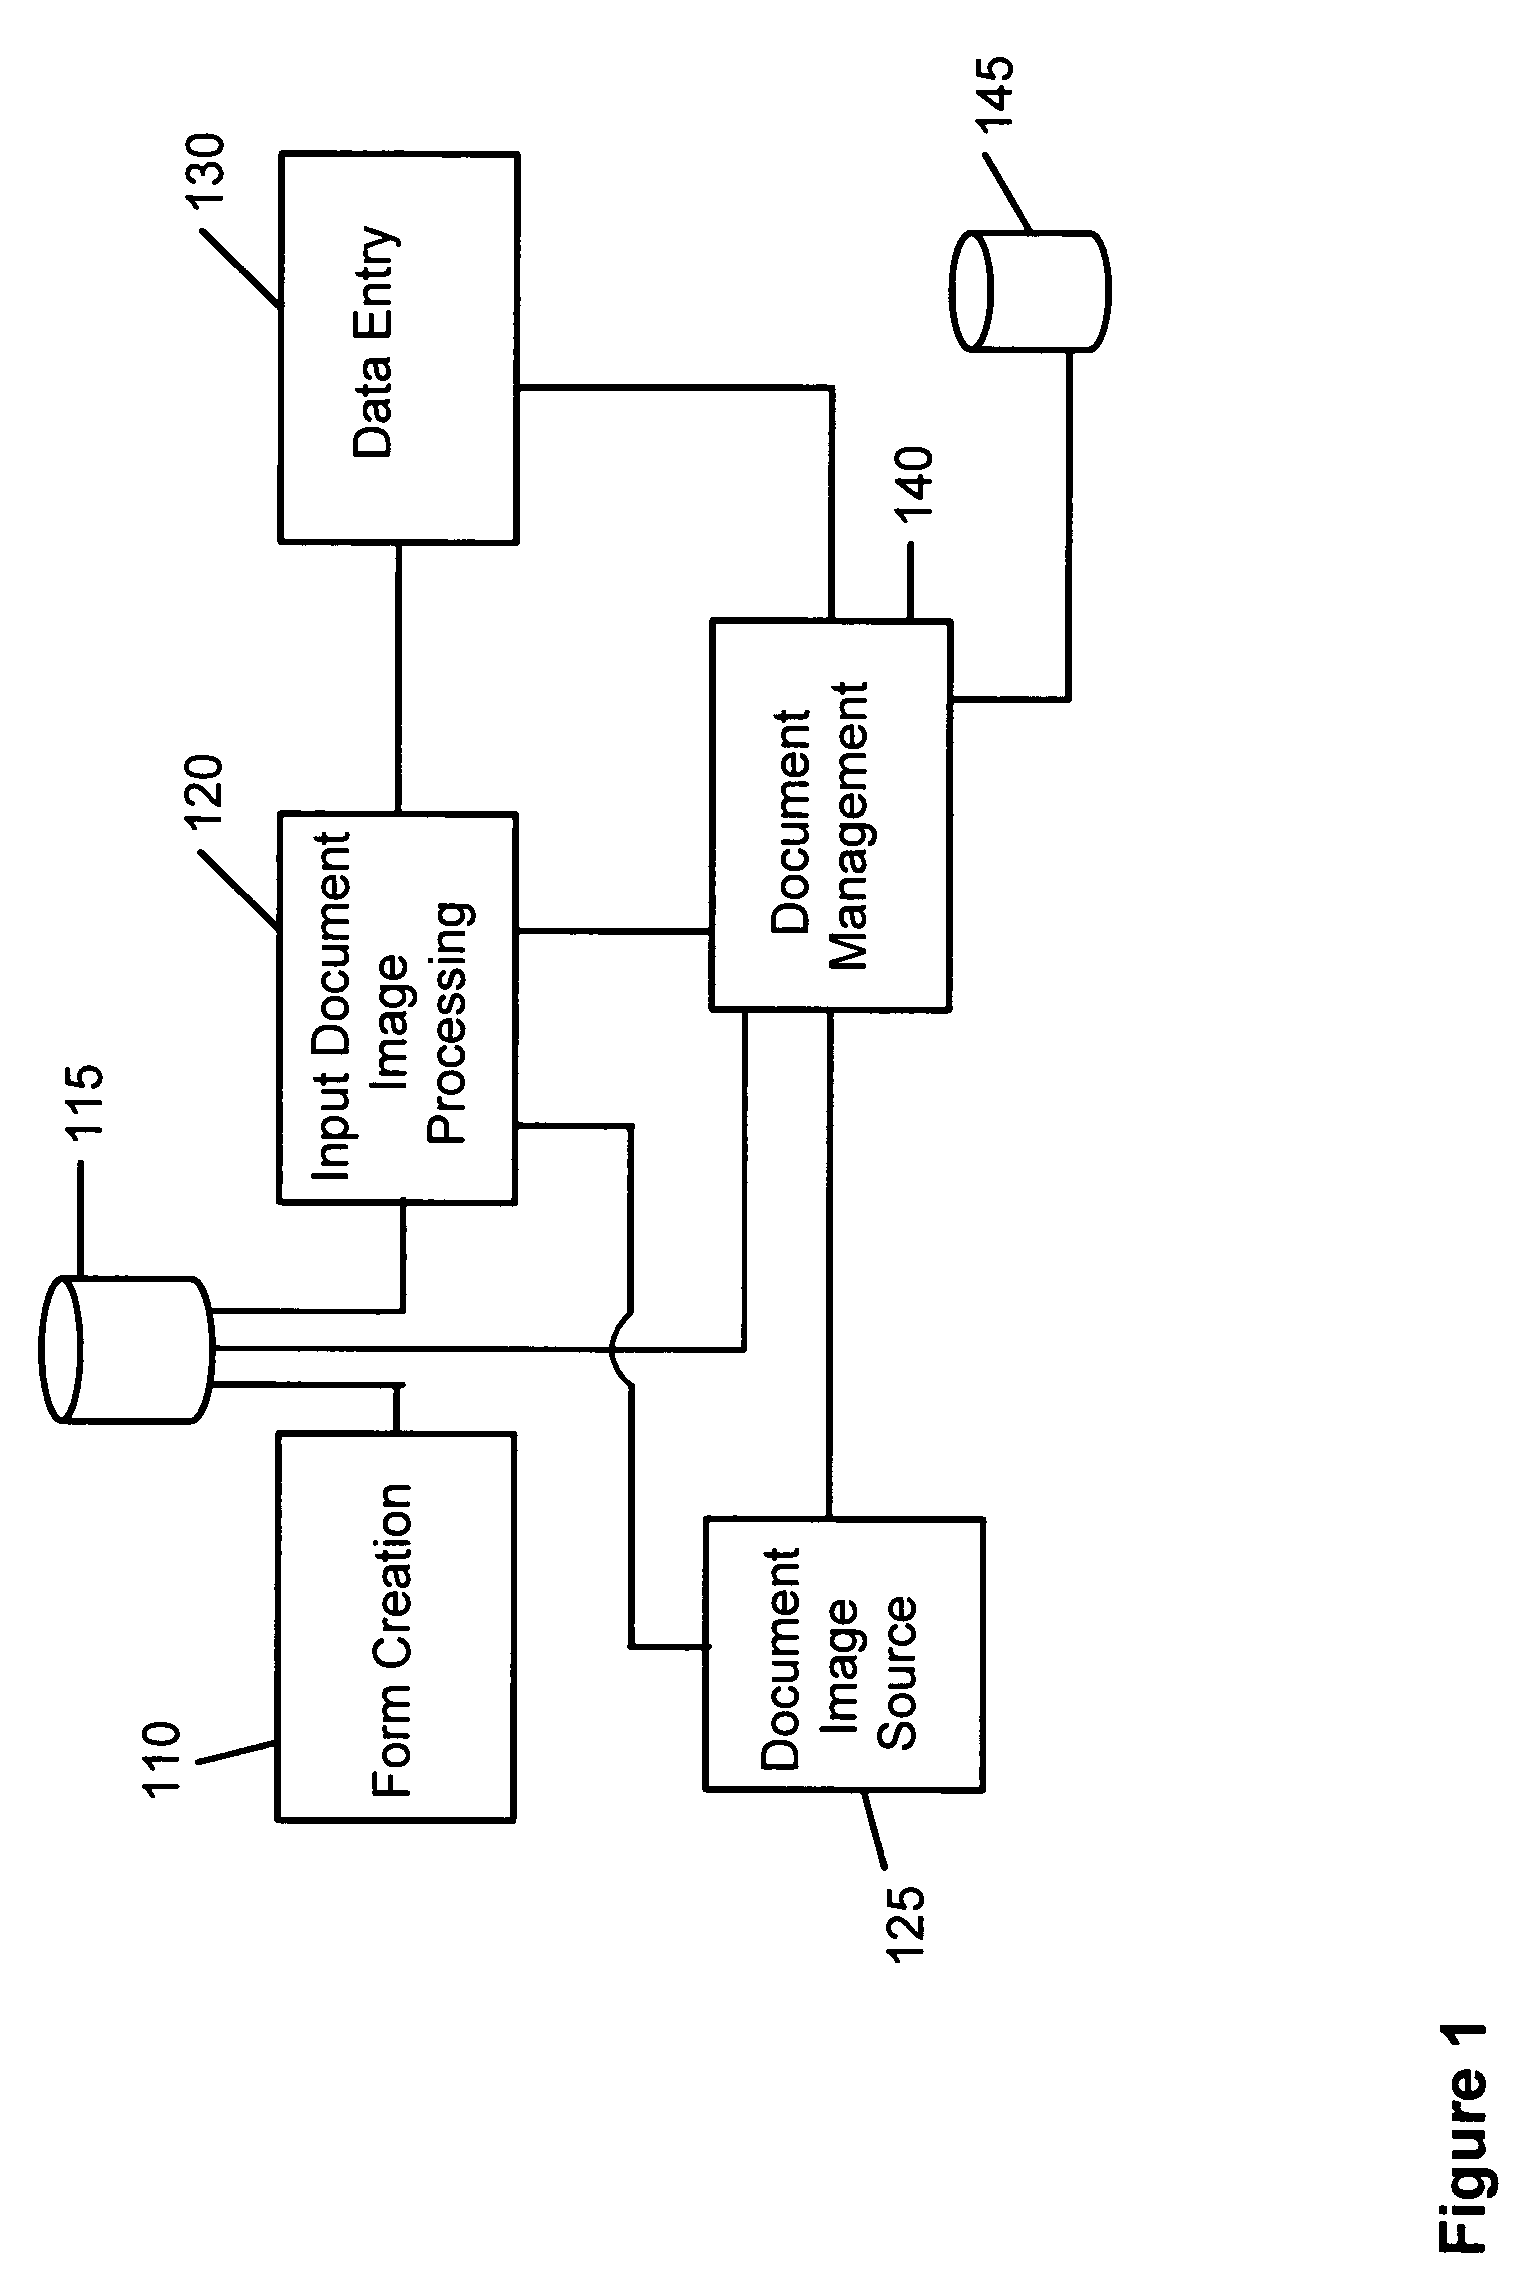 System and method for electronically processing document images